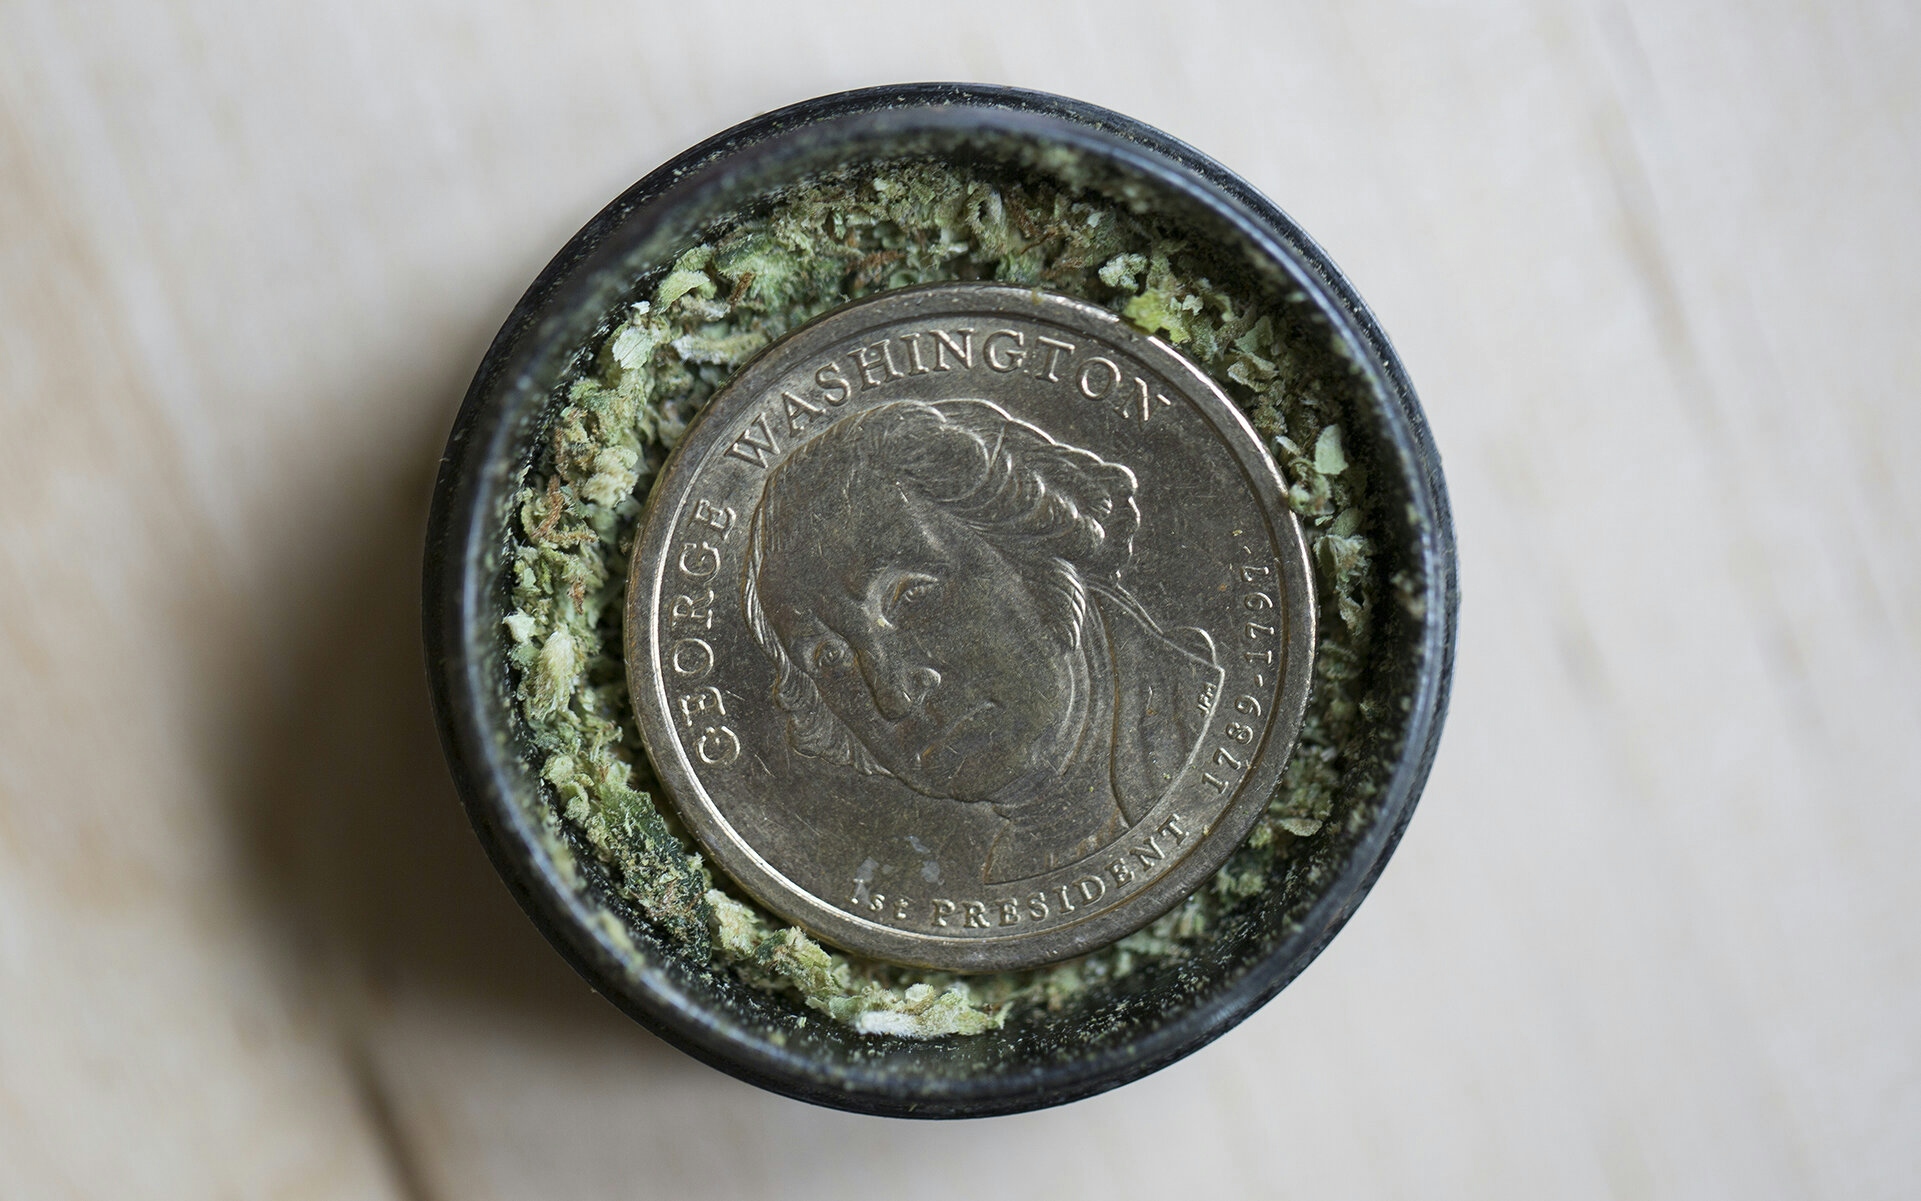 How To Clean A Grinder In 5 Easy Steps